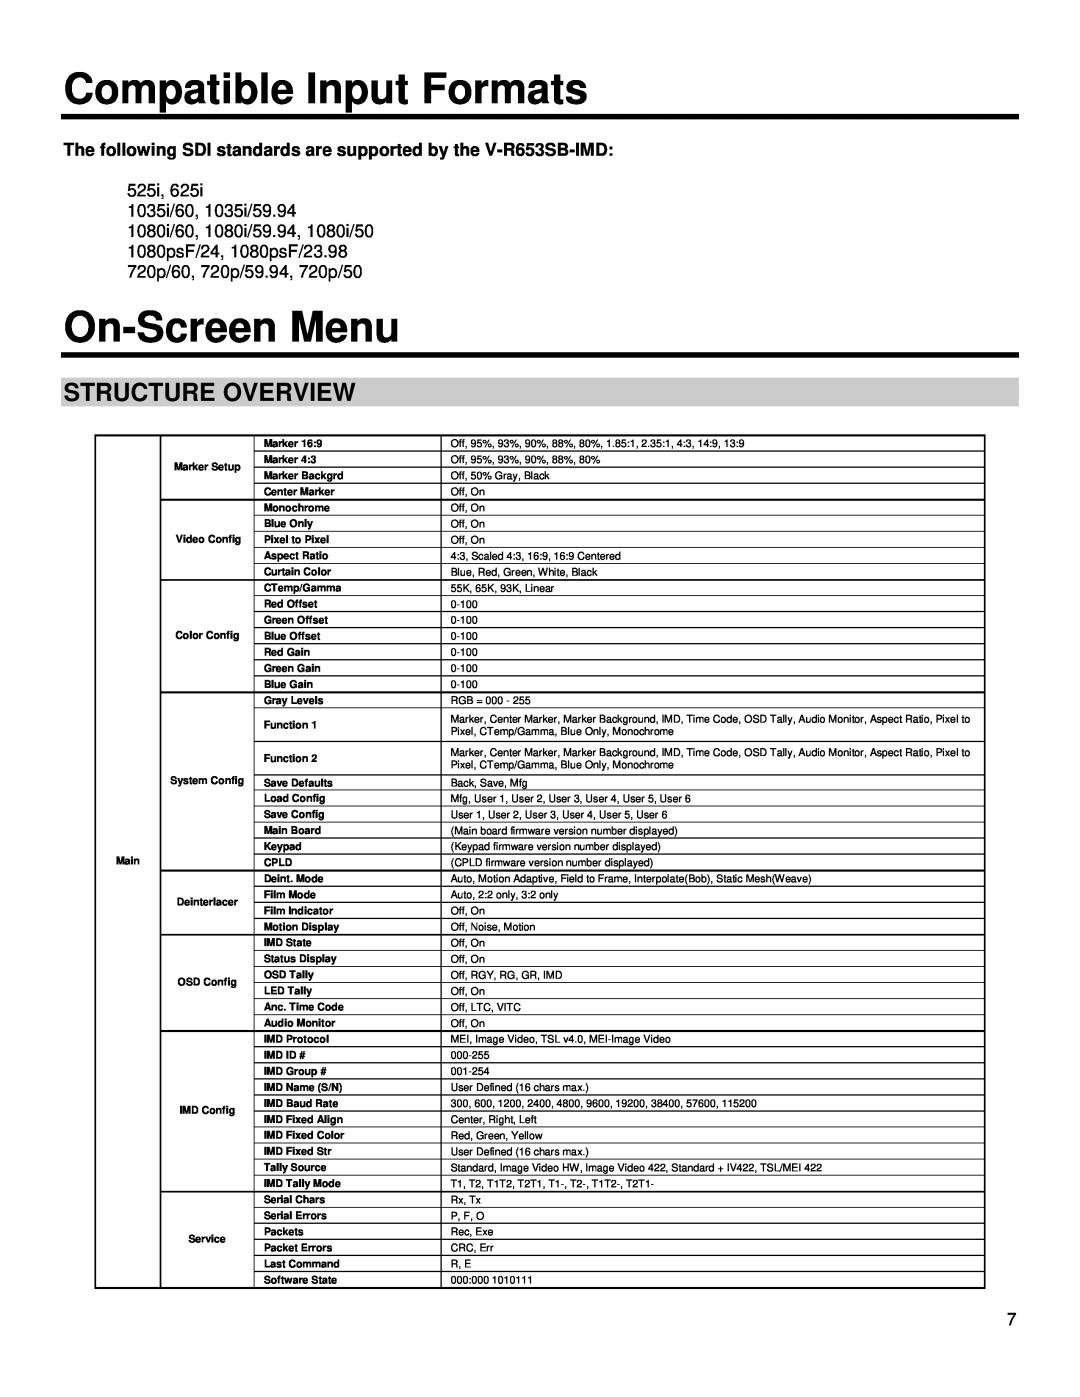 Marshall electronic V-R653SB-IMD manual Compatible Input Formats, On-Screen Menu, Structure Overview 